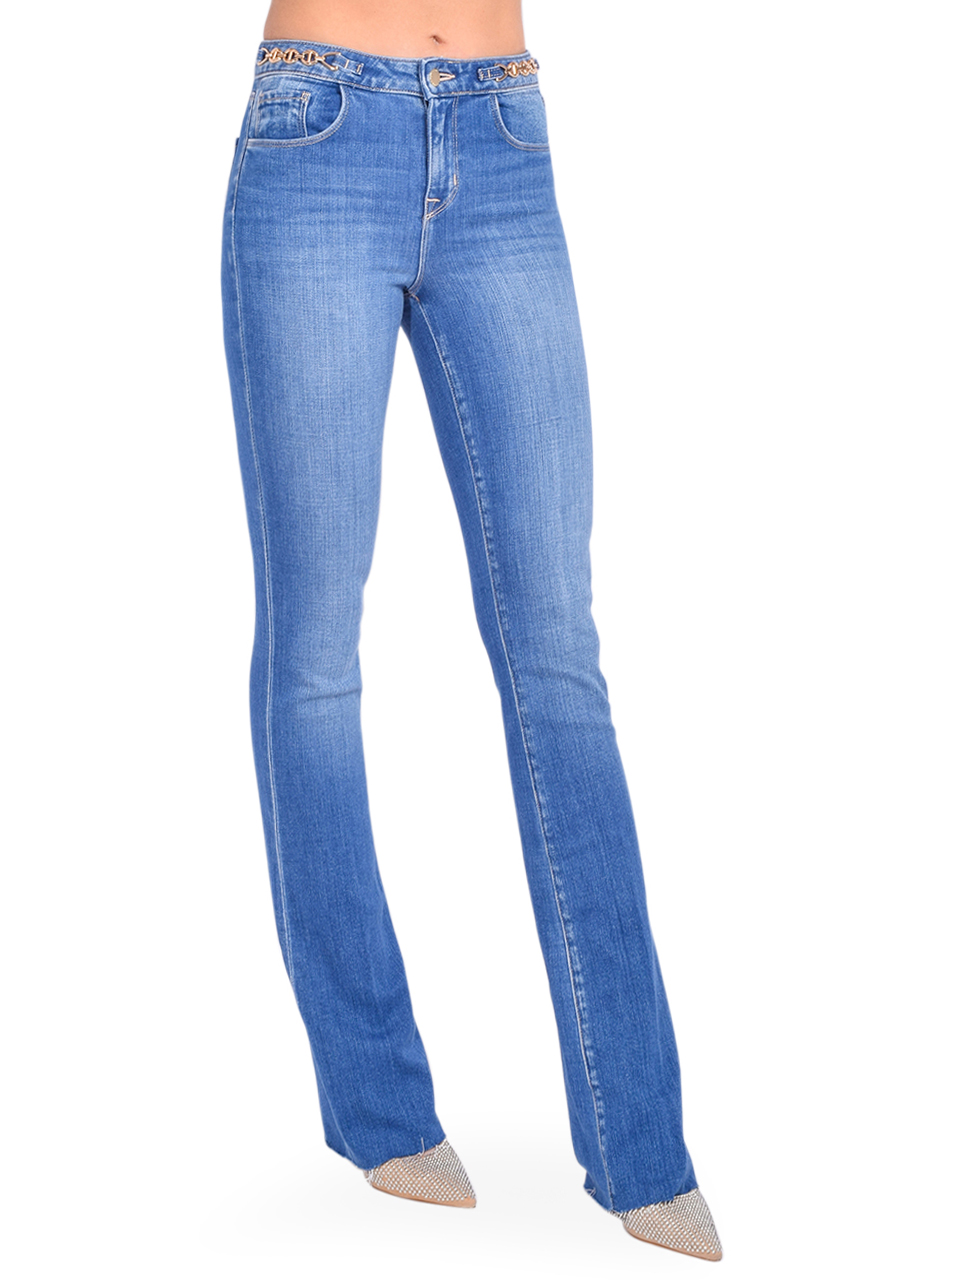 L'AGENCE Ruth High Rise Straight Jean in Century Side View 